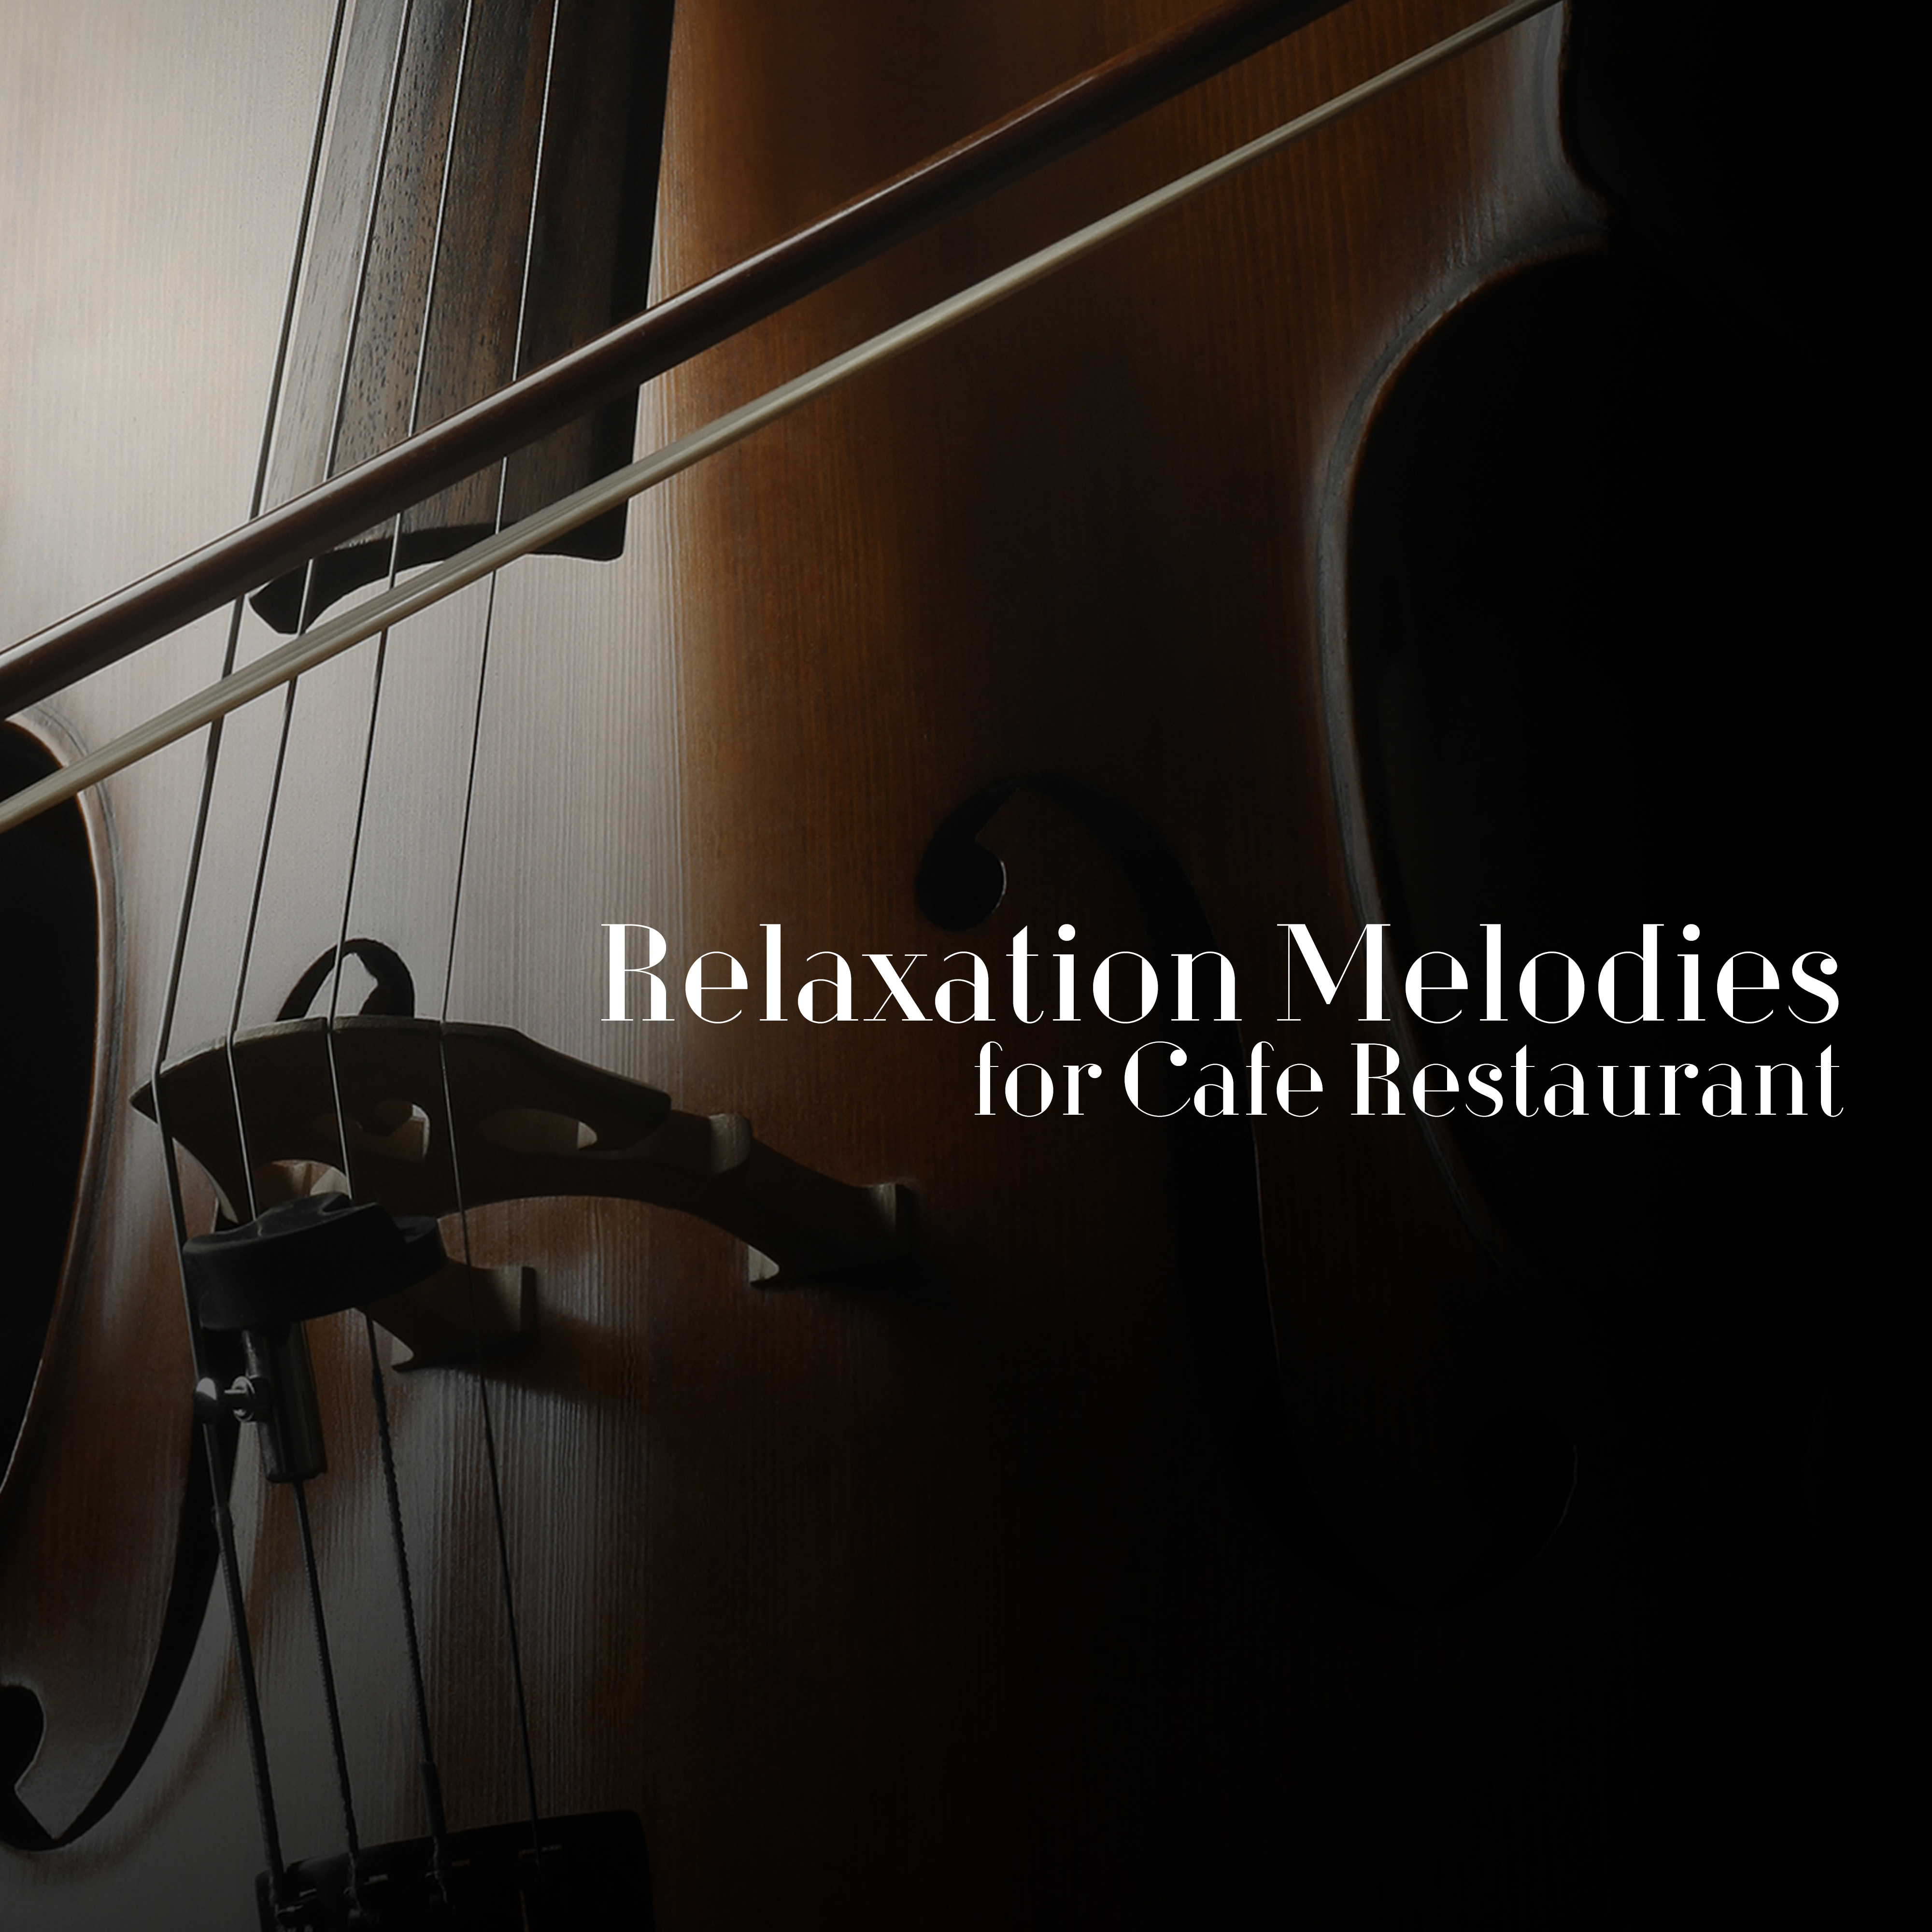 Relaxation Melodies for Cafe Restaurant